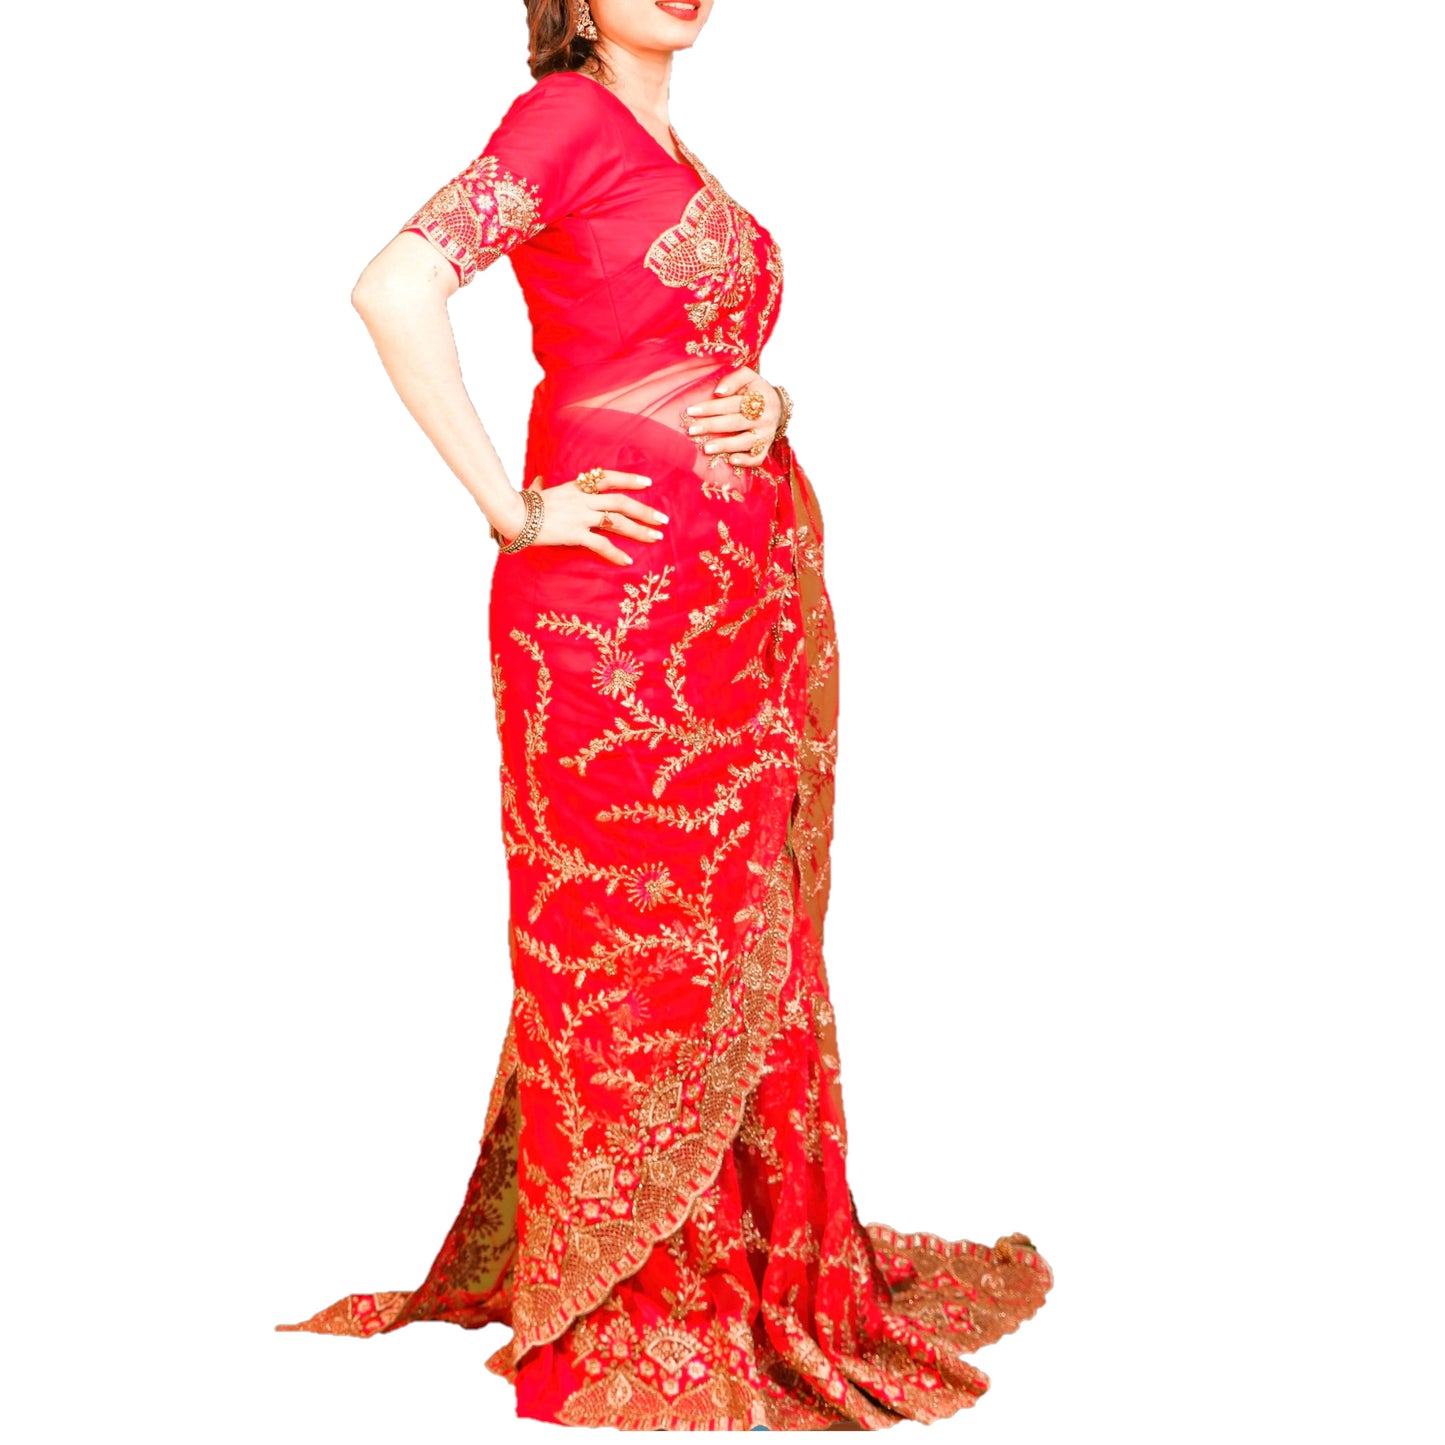 Maharani's Party Wear Heavy Zari Net Georgette Saree - Bridal Red (with Stitched Blouse and Petticoat)